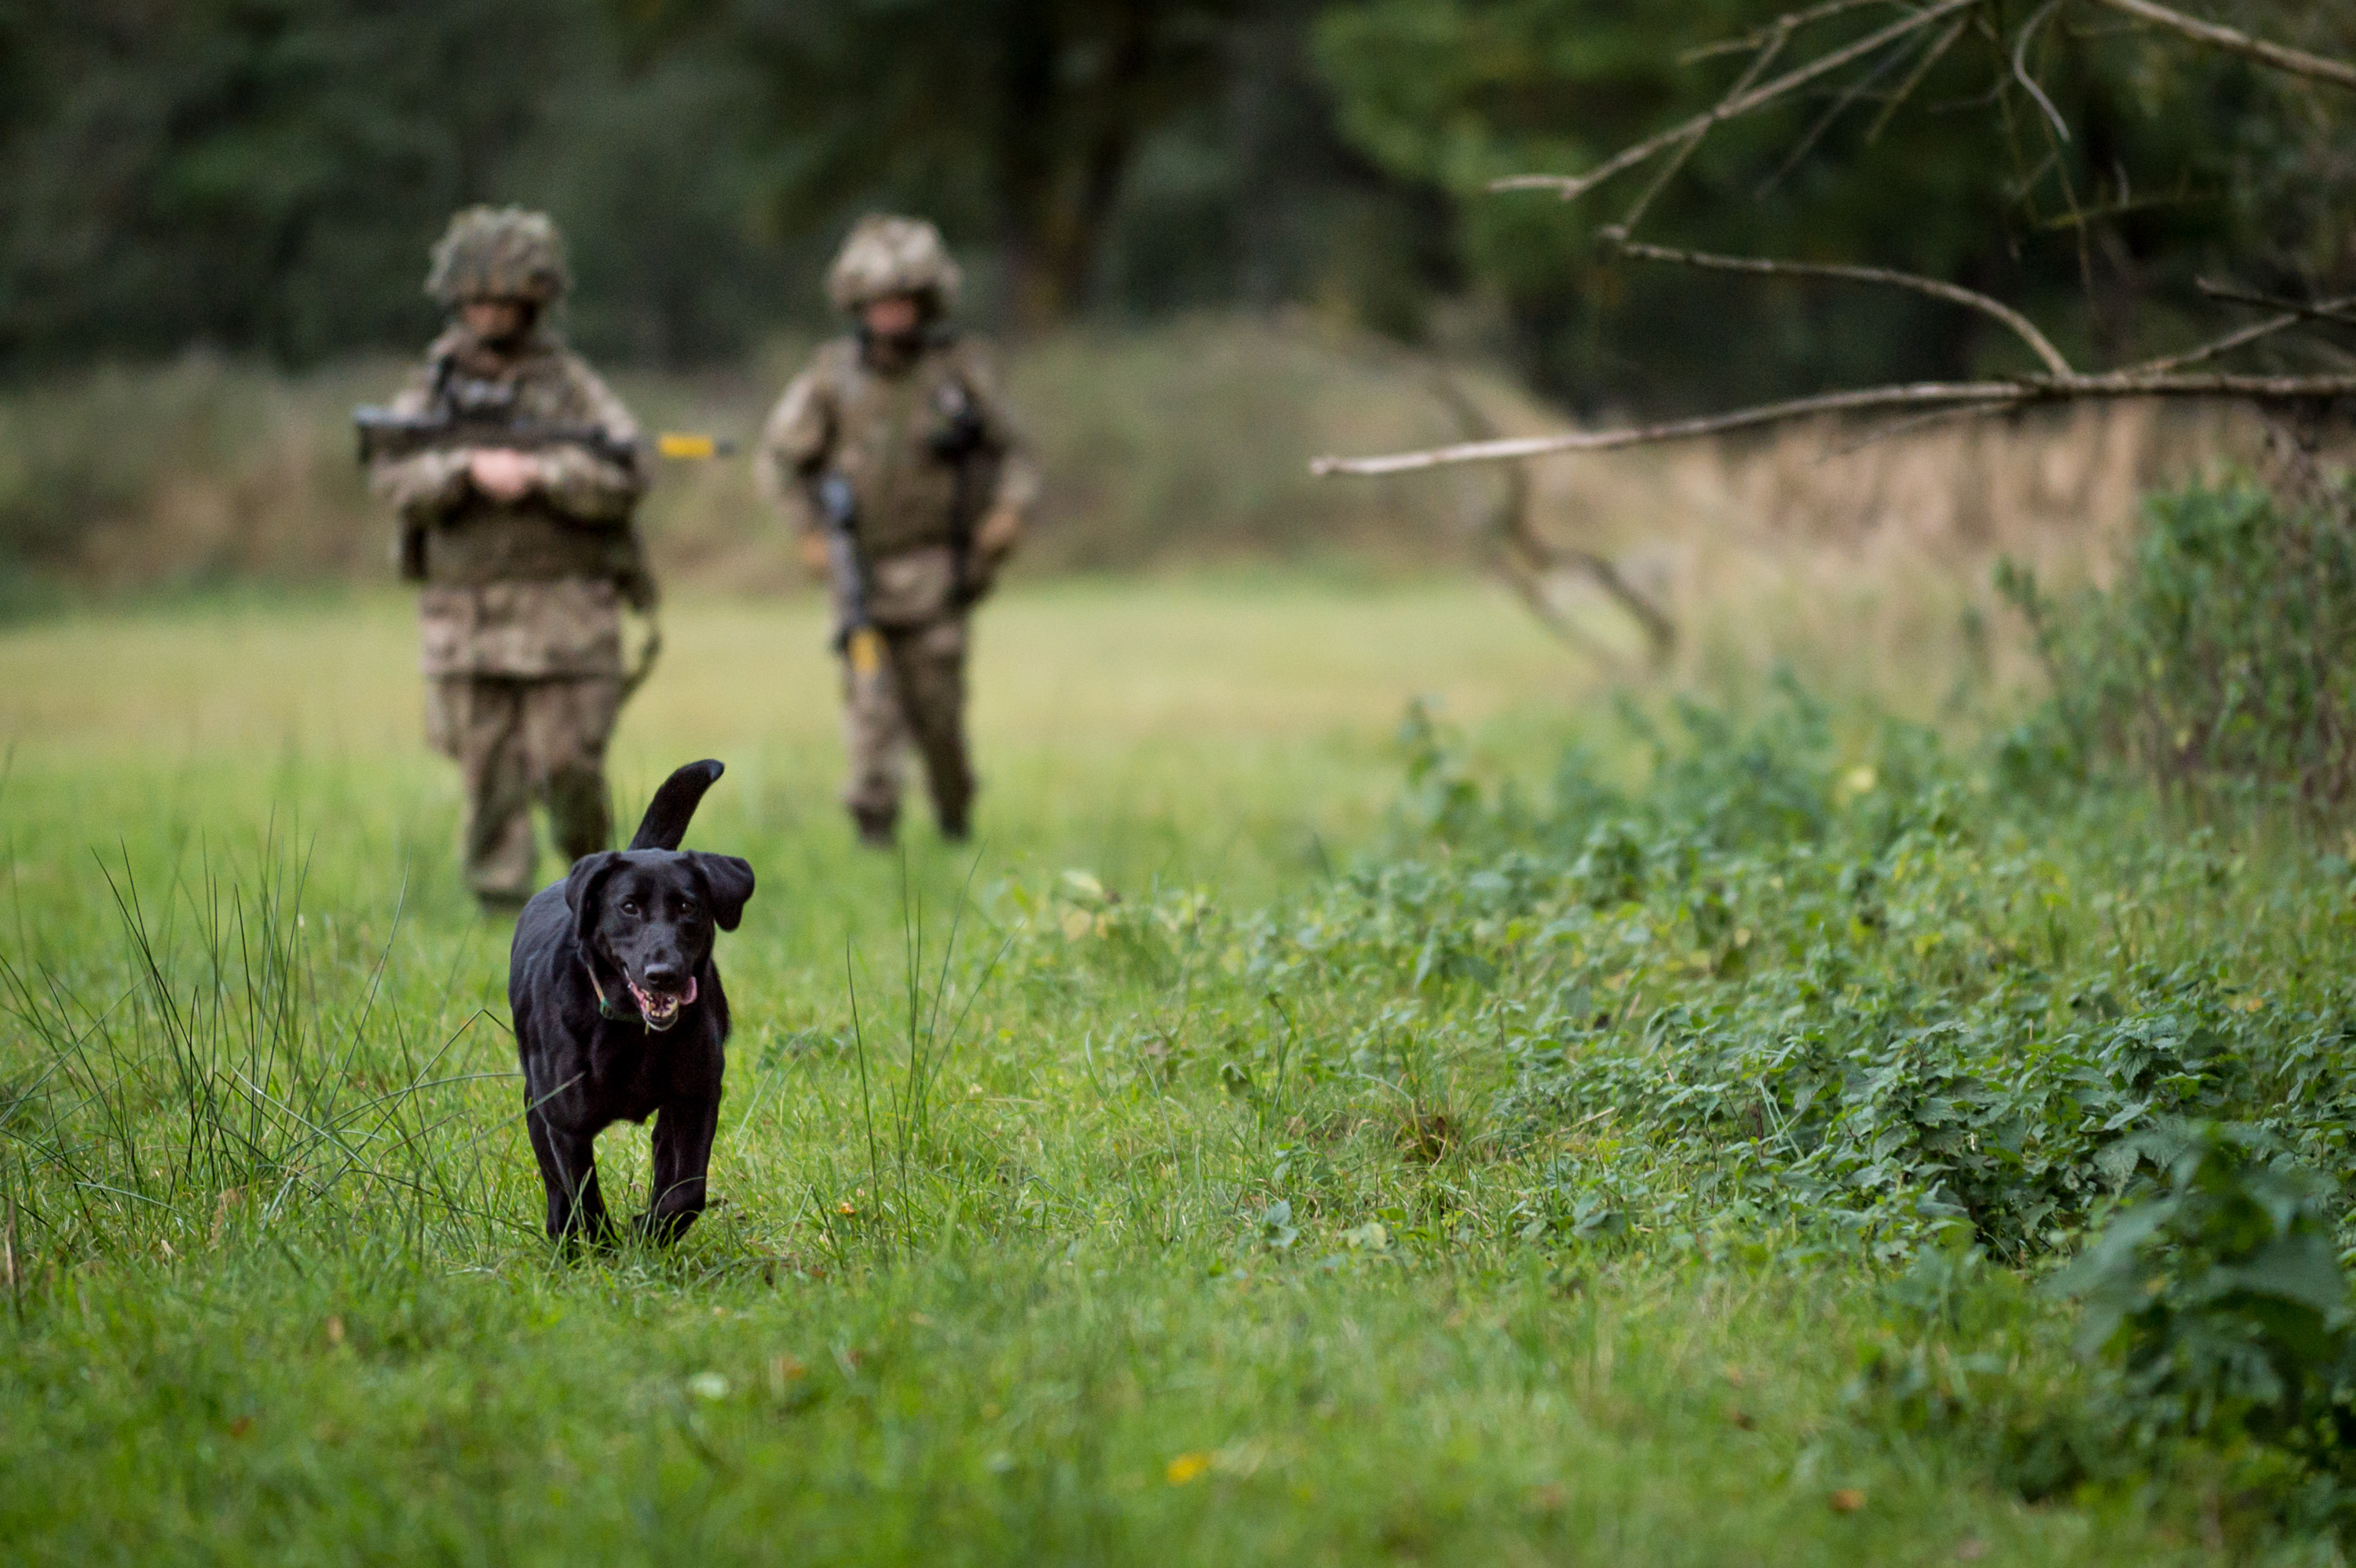 Reserve and Regular Military Working Dog Squadrons Exercise together in Germany.  Members of the Reserve's, 101 Military Working Dog Squadron (101 MWD Sqn), along with their Regular colleagues from 102 Military Working Dog Squadron, 1st Military Working Dog Regiment (1 MWD Regt) have today completed their final training task together in Germany. Exercise CHIRON ALLIANCE, where members from across the Regiment came together to test their military skills, was a Squadron level exercise to test the units infantry and soldiering skills as well as their dog handling skills in a testing environment, both for themselves and their animals.   Photographer; Mr Dominic King  Army Press Office Germany